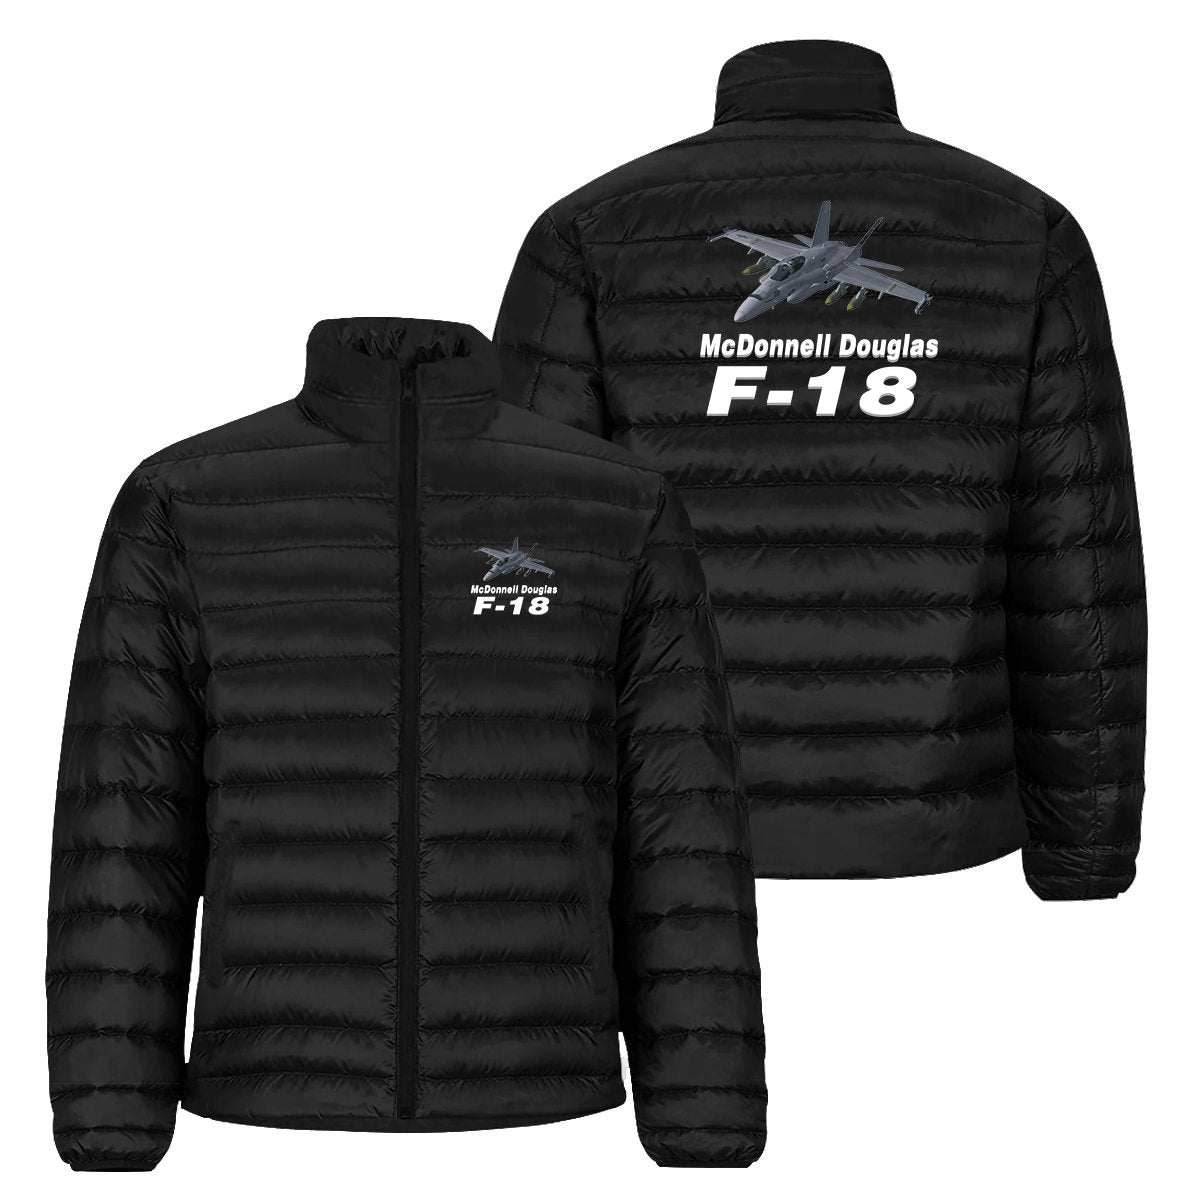 The McDonnell Douglas F18 Designed Padded Jackets